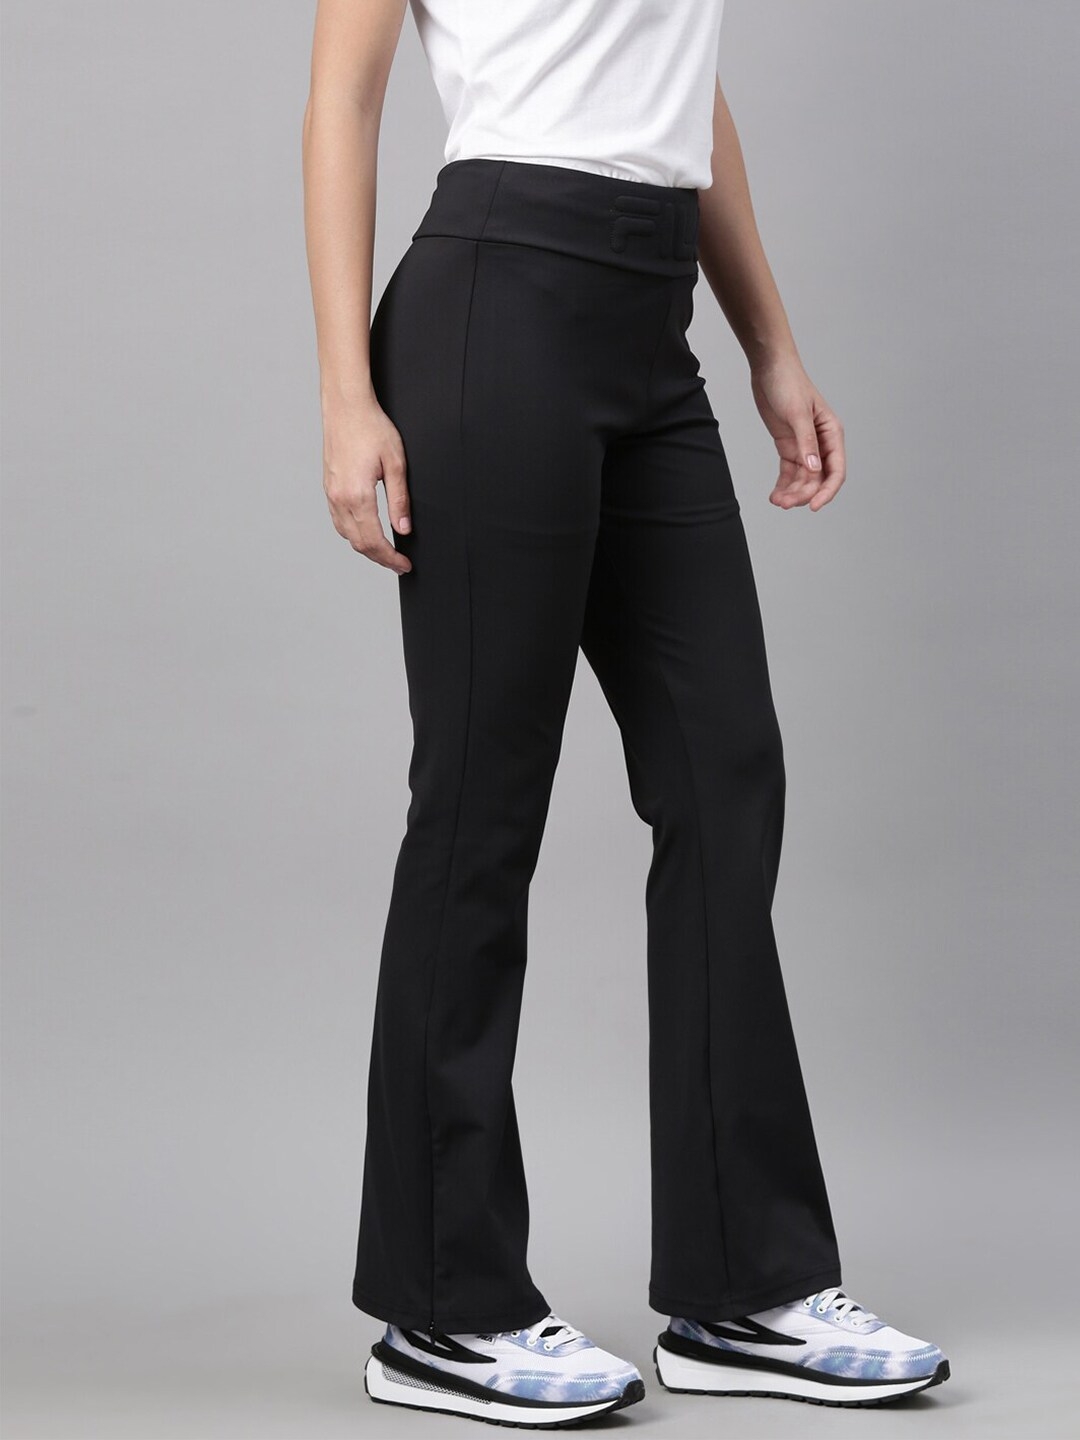 Women Polyester Trousers  Buy Women Polyester Trousers online in India